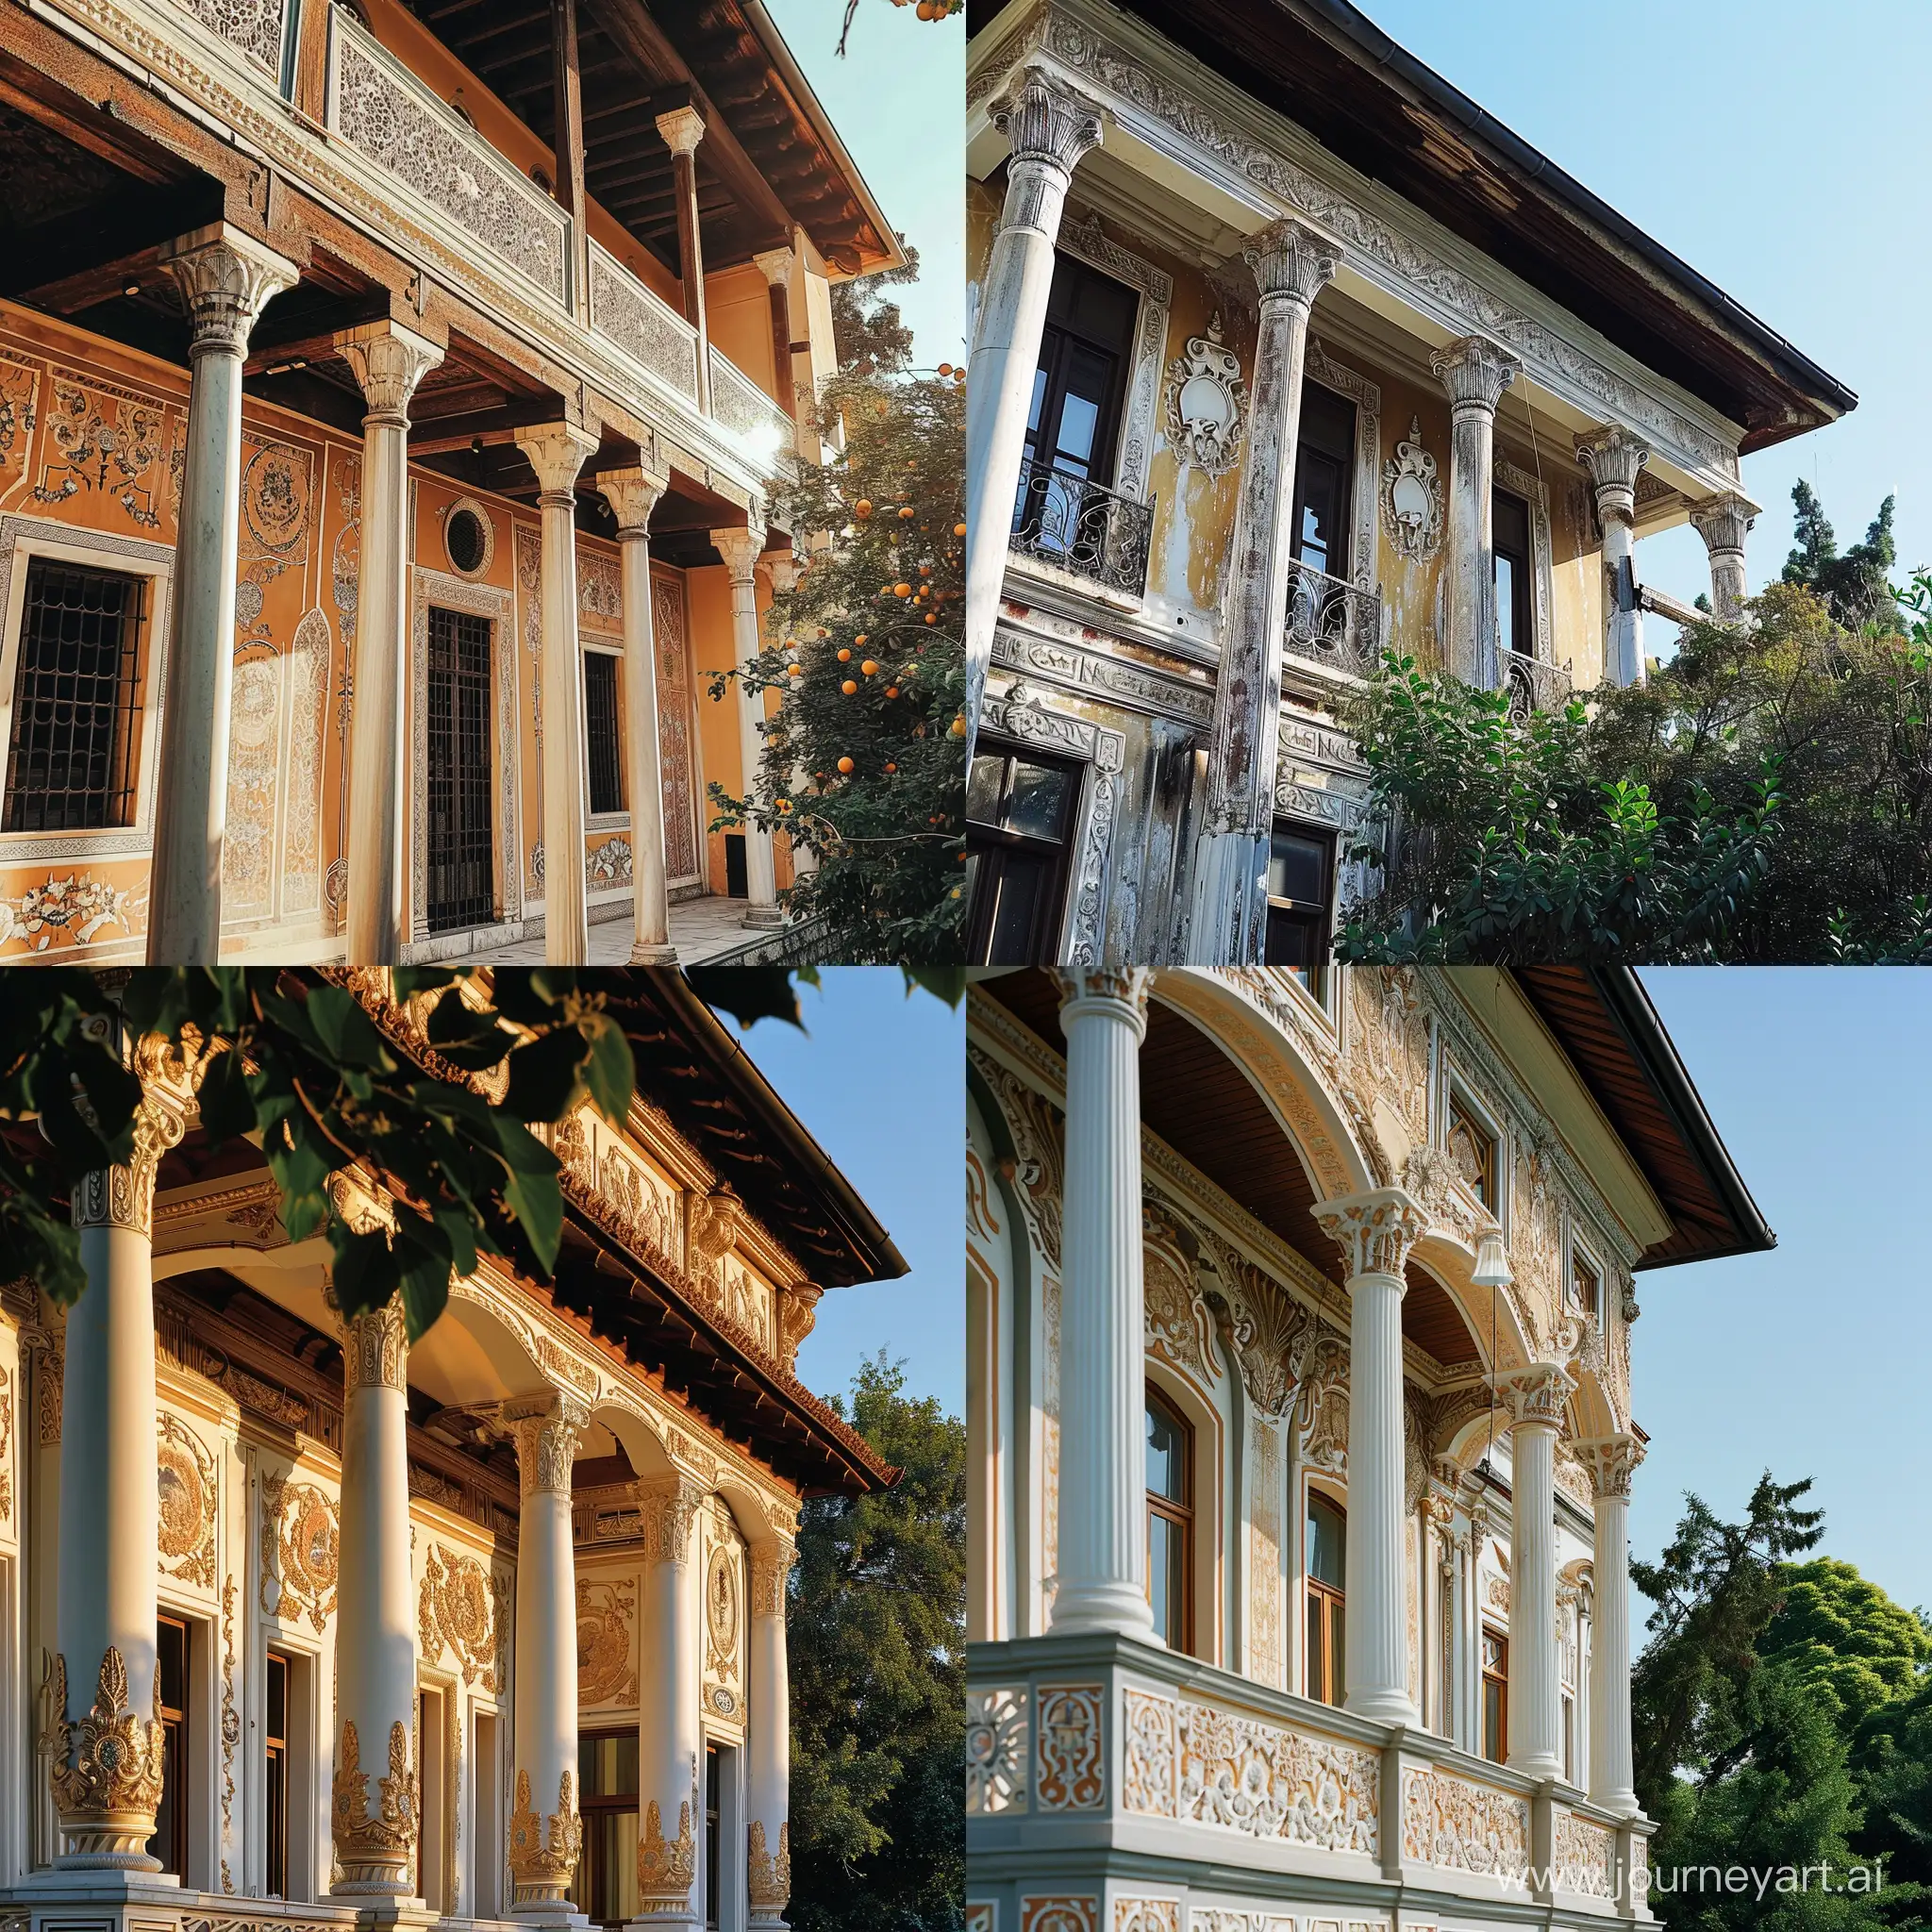 Sunlit-Turkish-House-with-Baroque-Columns-and-Decorations